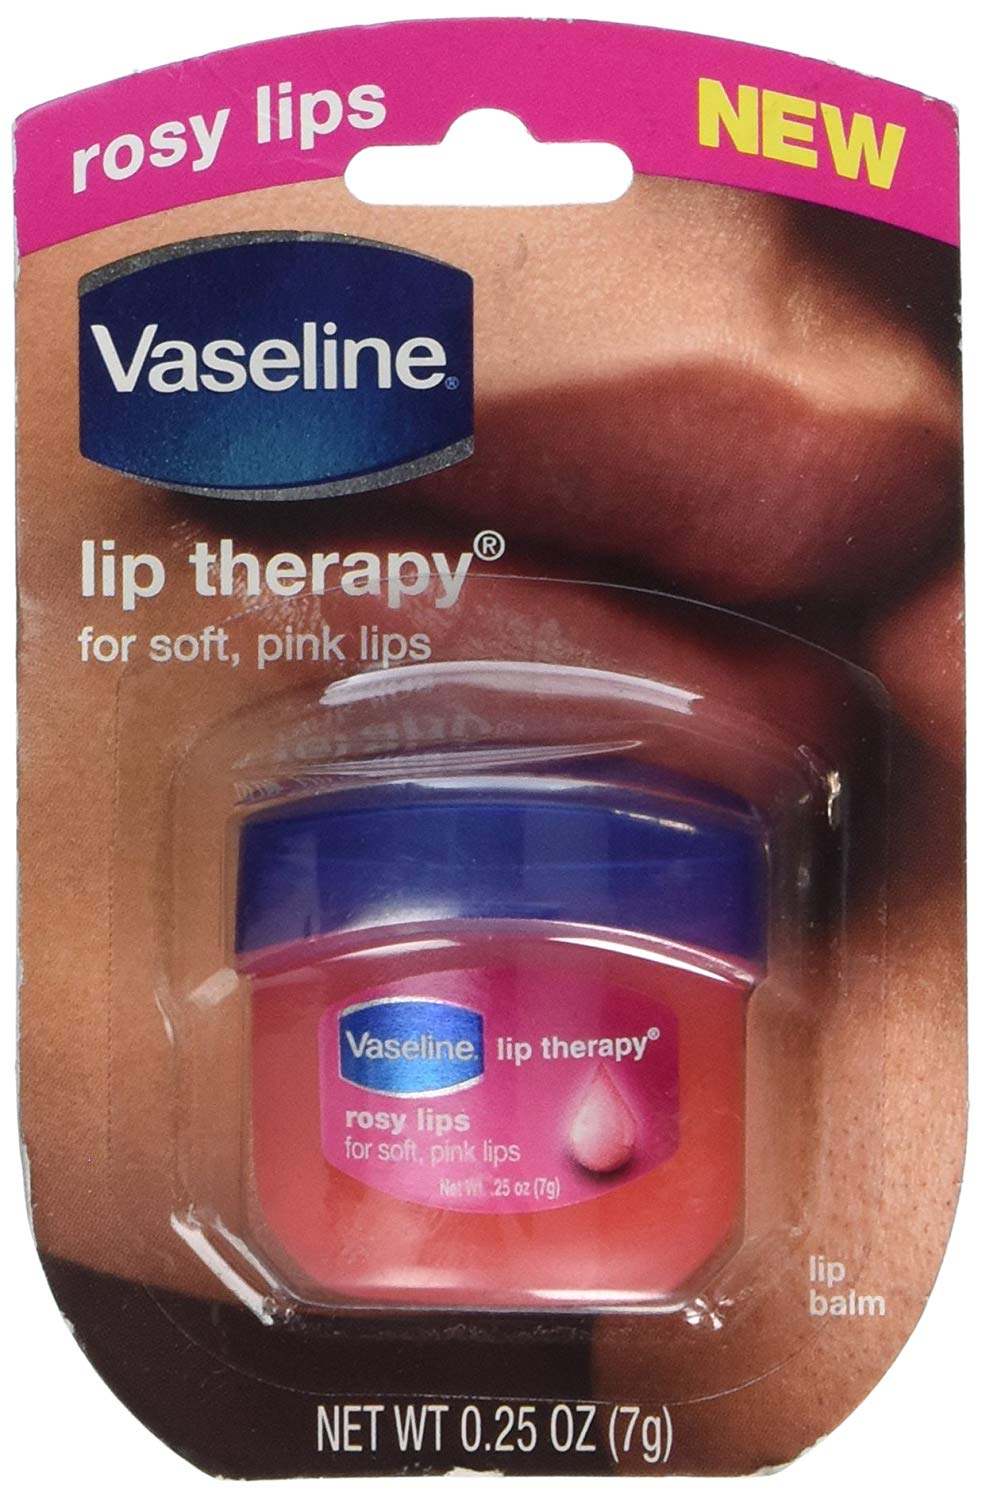 4 Pack Vaseline Rosy Lips Lip Therapy for Soft, Pink Lips, 0.25oz Each - image 1 of 3